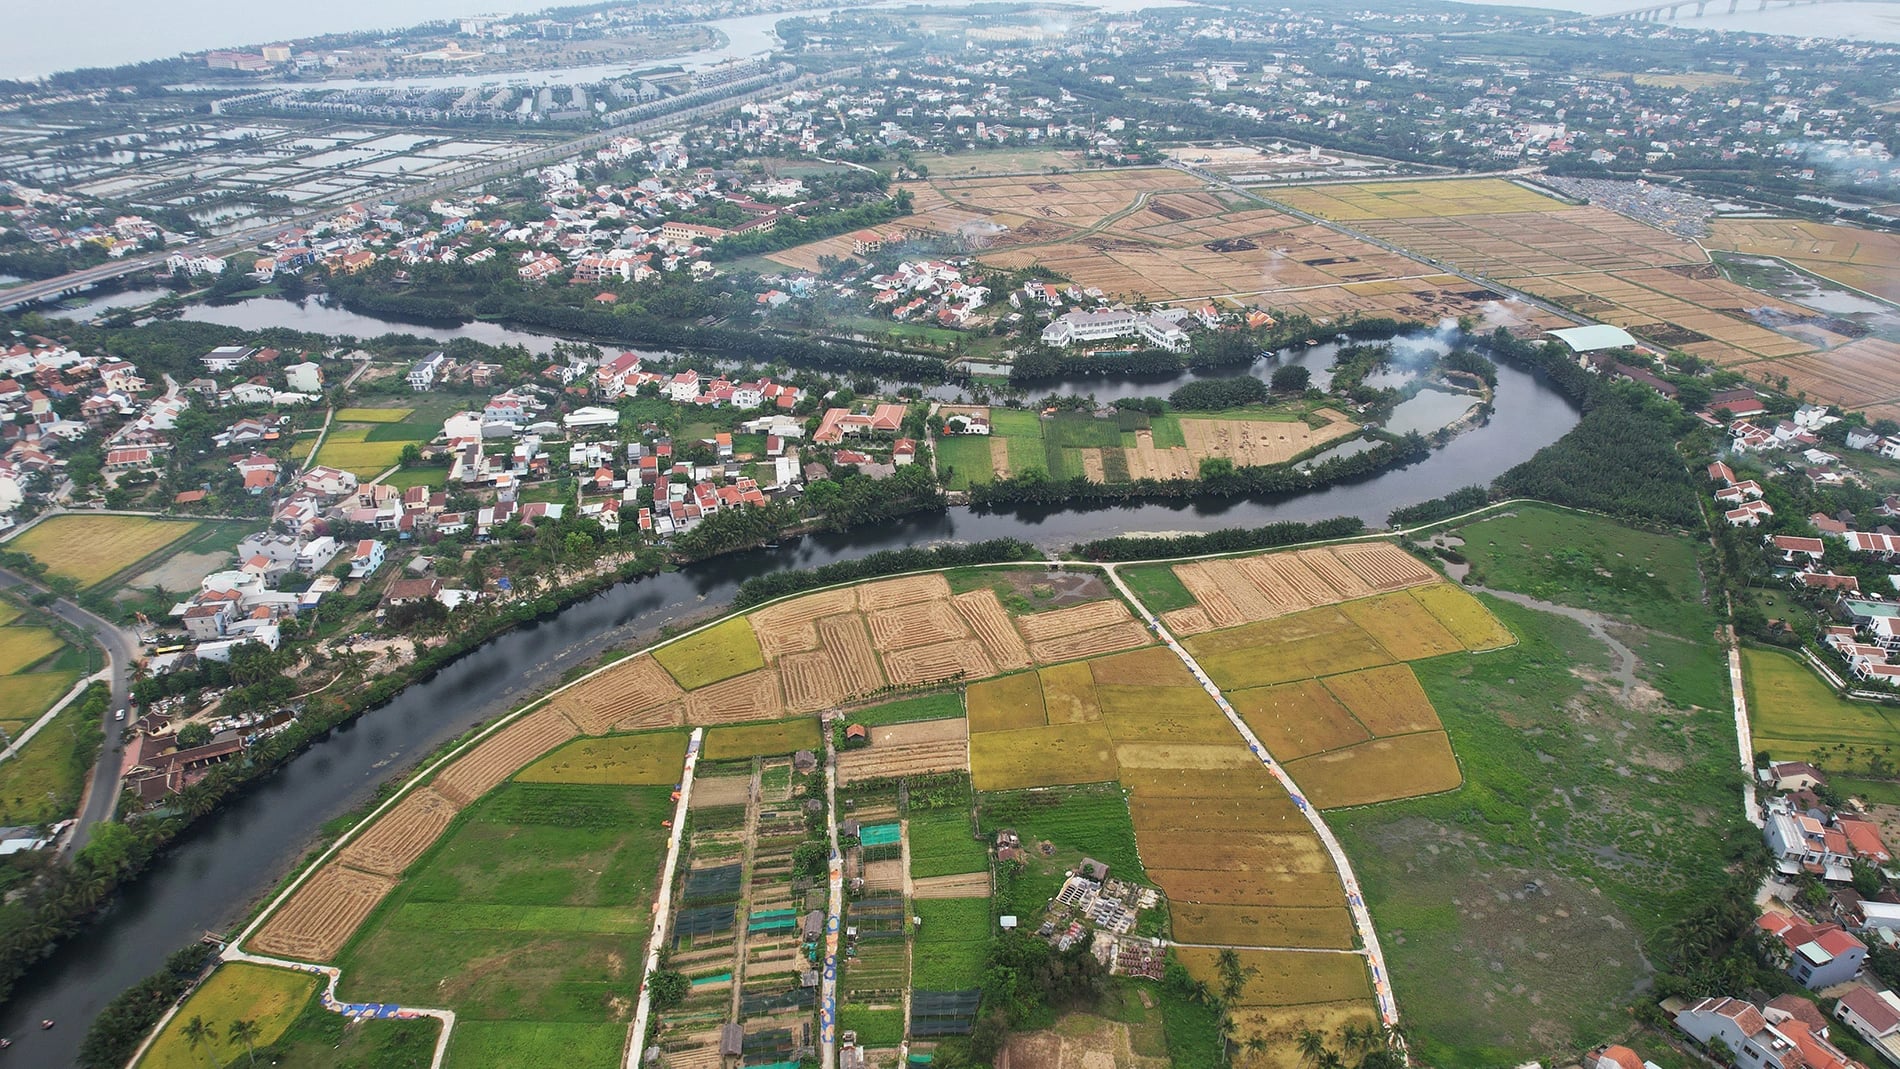 Paddy fields nestle next to a river on the edge of Hoi An Ancient Town, central Vietnam. Photo: Pham Van Son